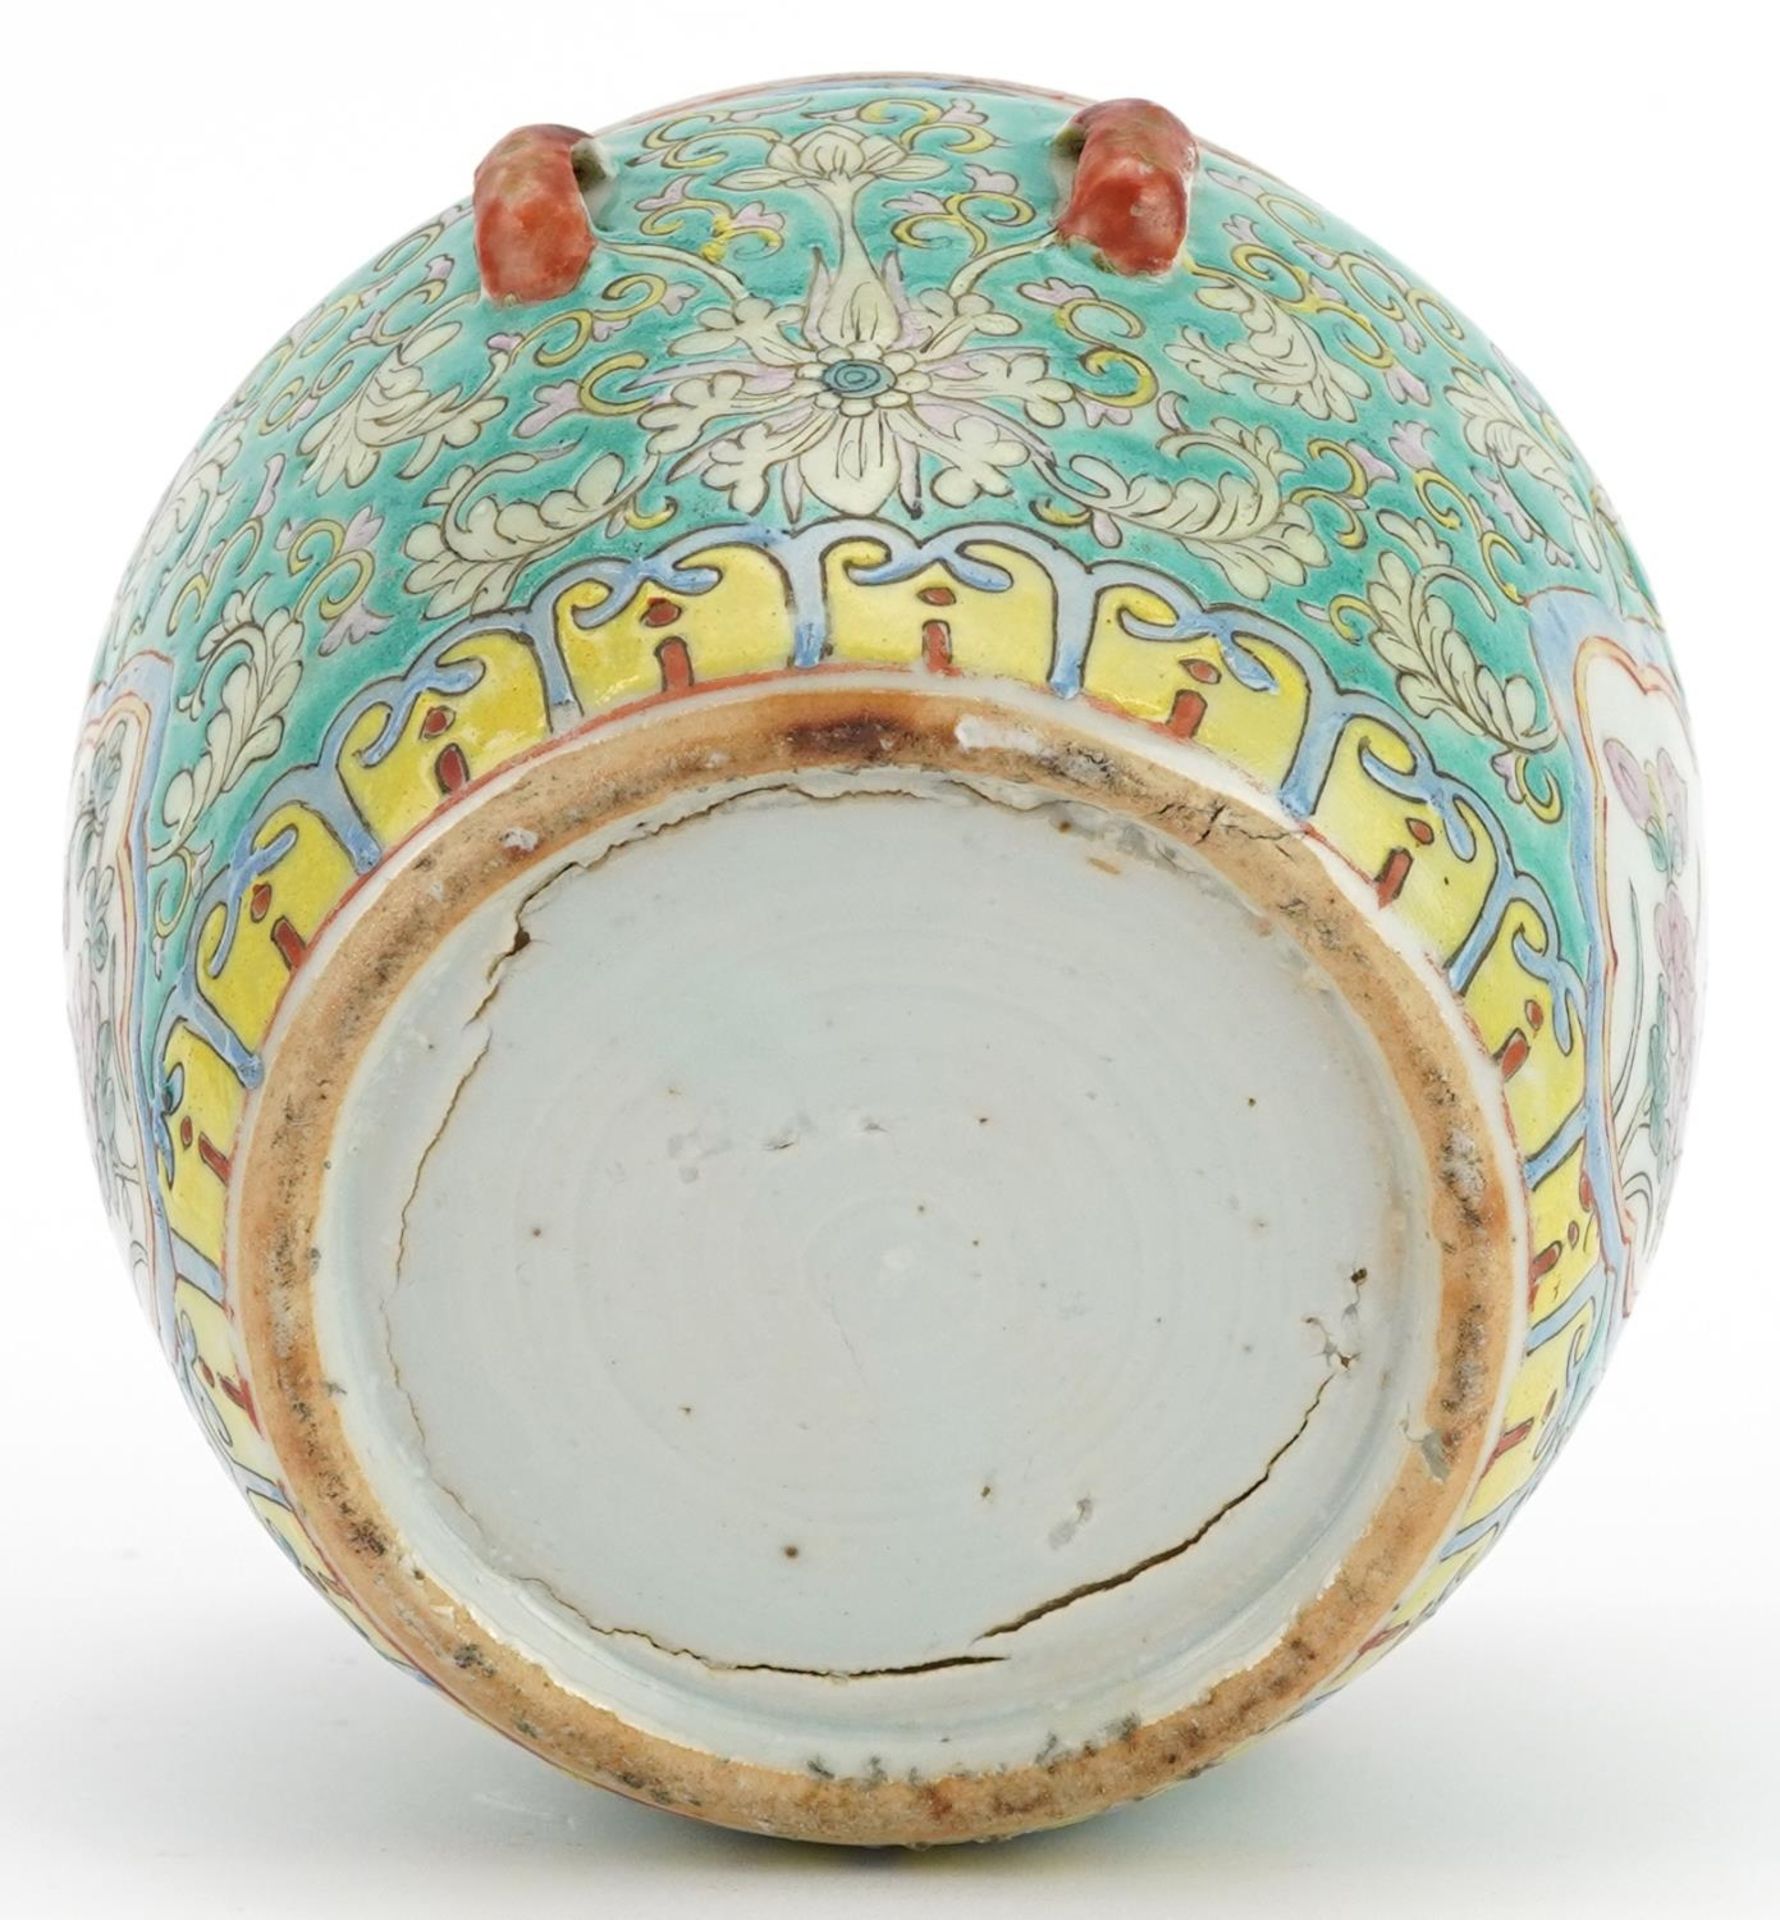 Chinese Peranakan Nyonya Straits porcelain kamcheng hand painted with flowers amongst scrolling - Image 6 of 6